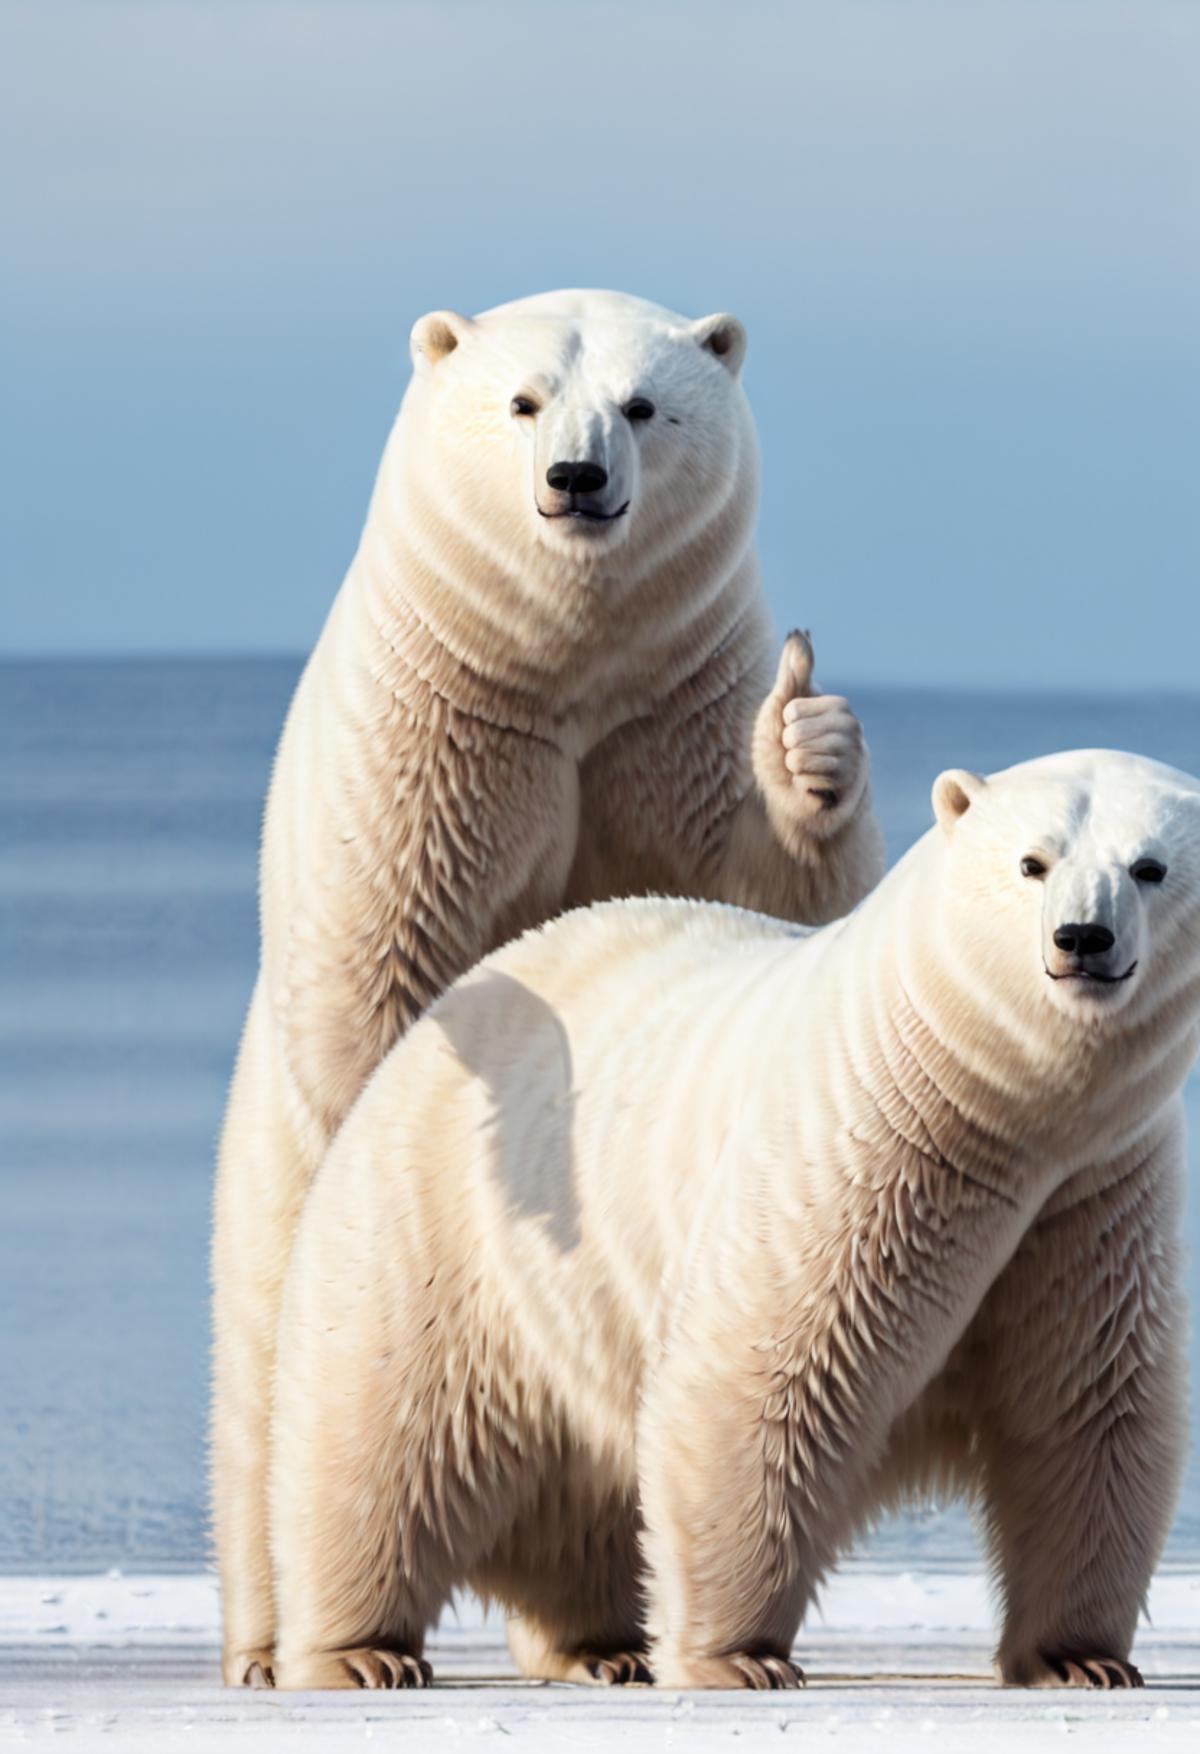 Two polar bears standing on the beach, one giving a thumbs up.